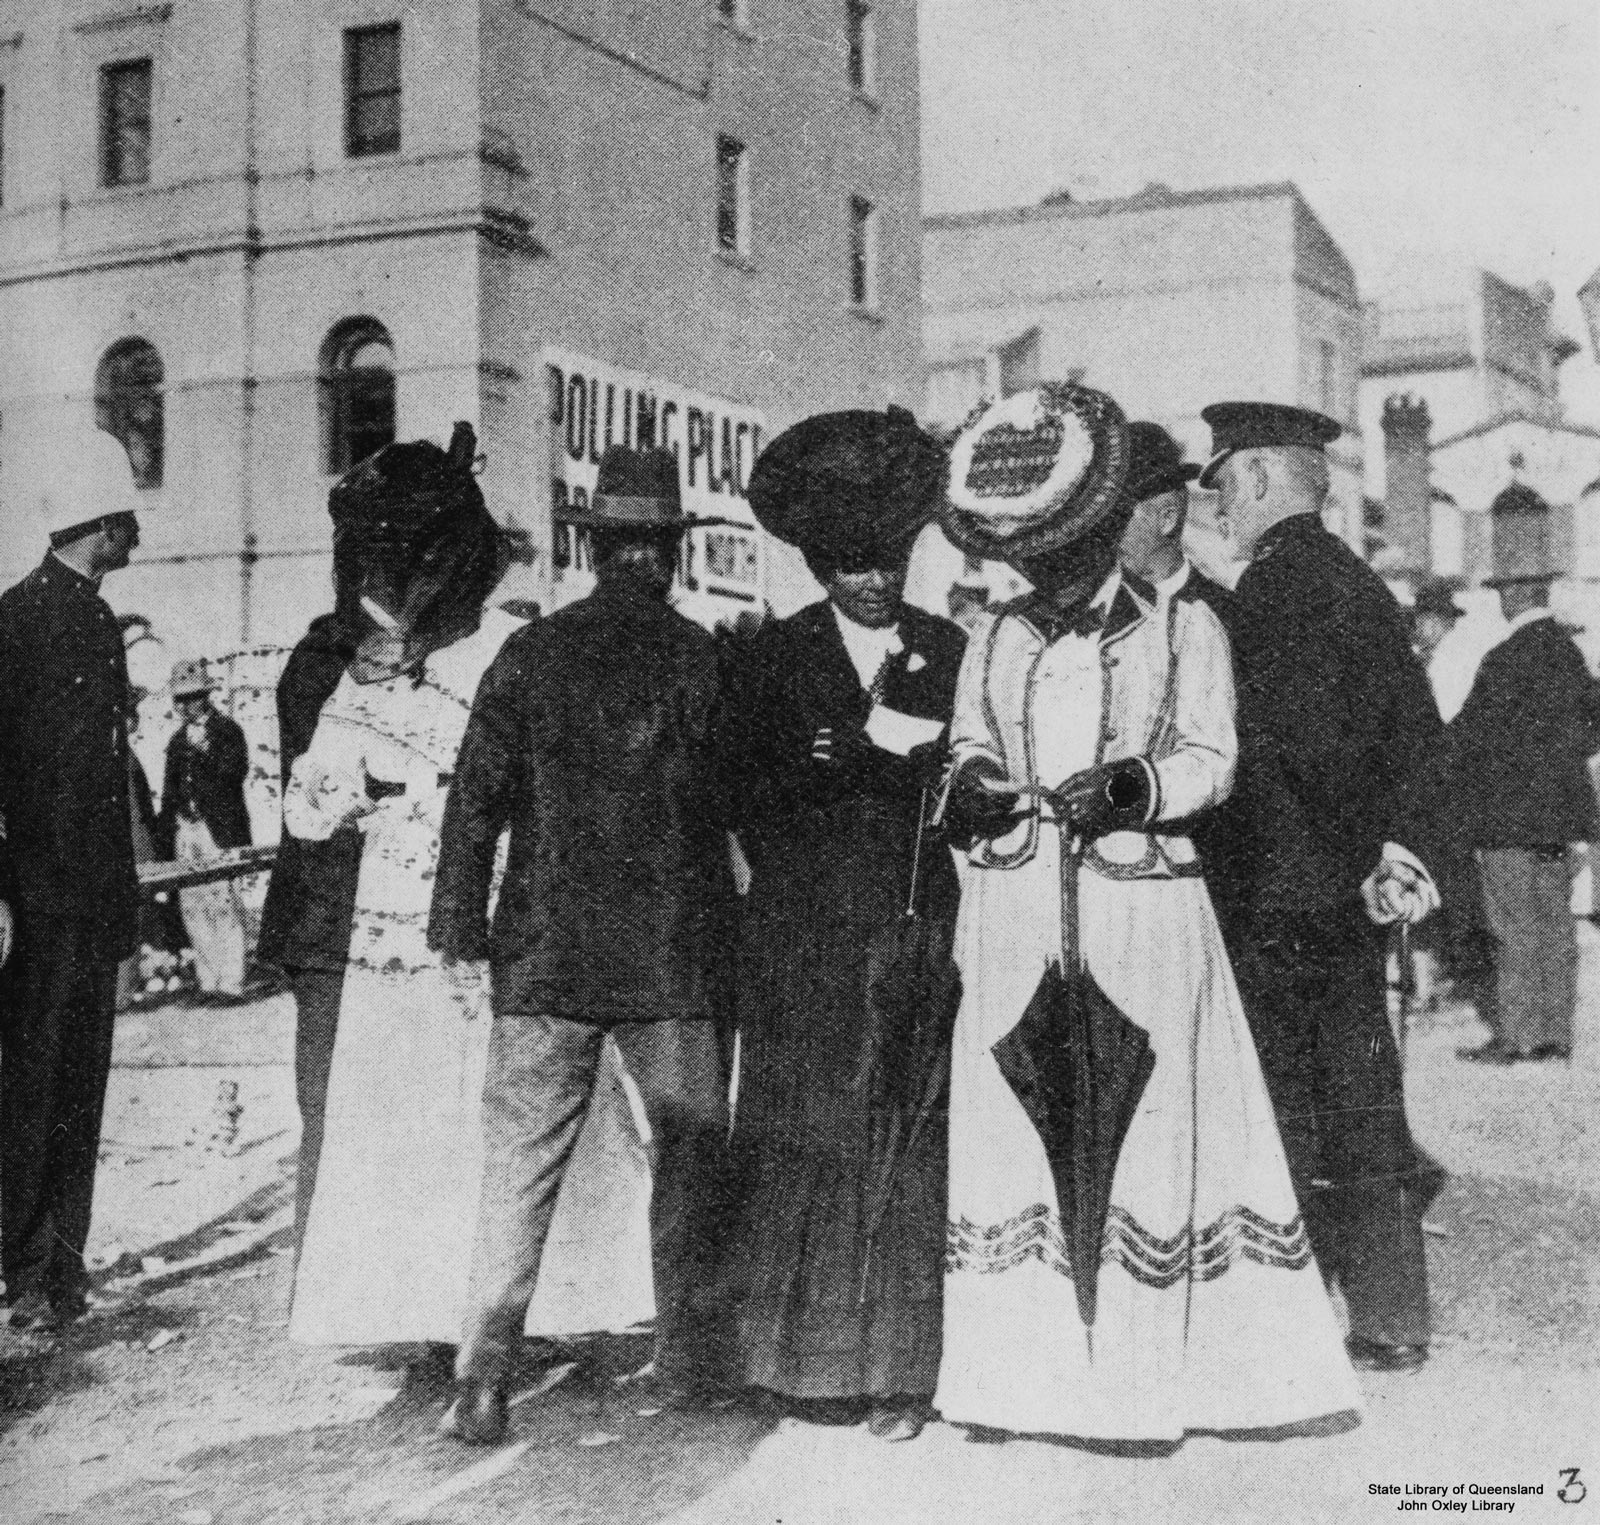 Men and women at a polling booth on Adelaide Street in Brisbane, 1907.